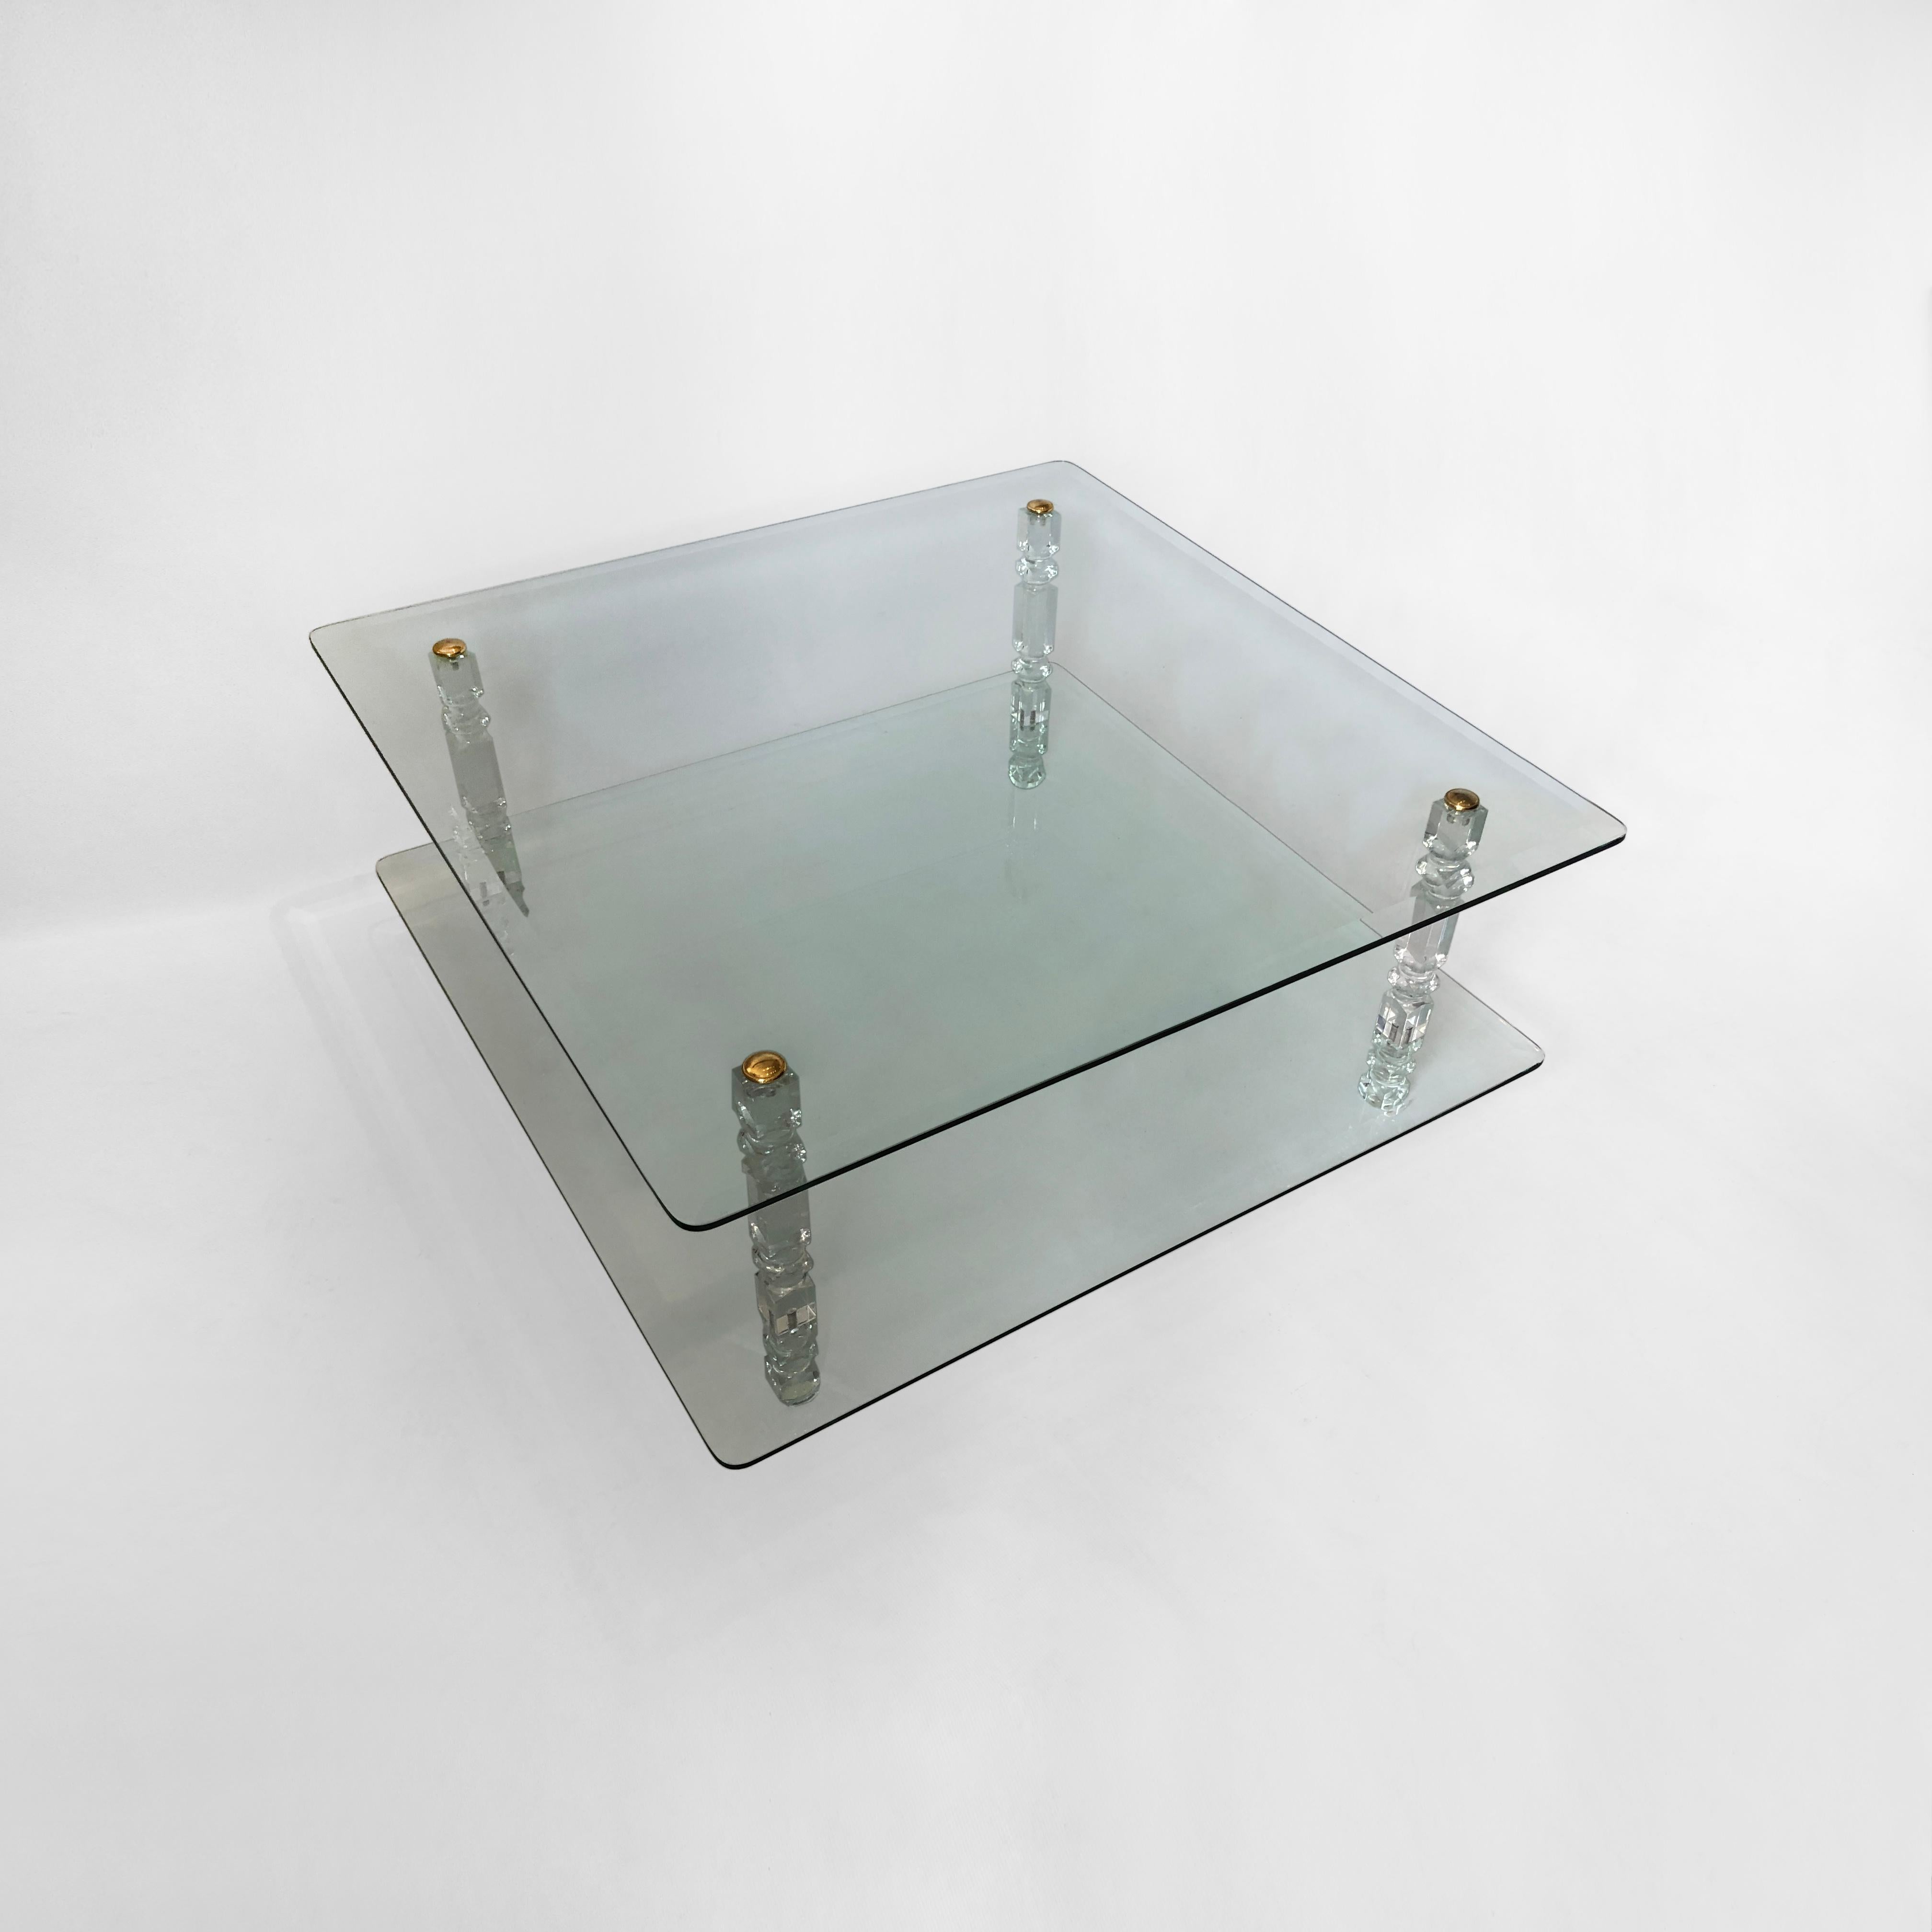 American Two-Tier Lucite Glass Brass Coffee Table 1970s Modernist Charles Hollis Jones For Sale